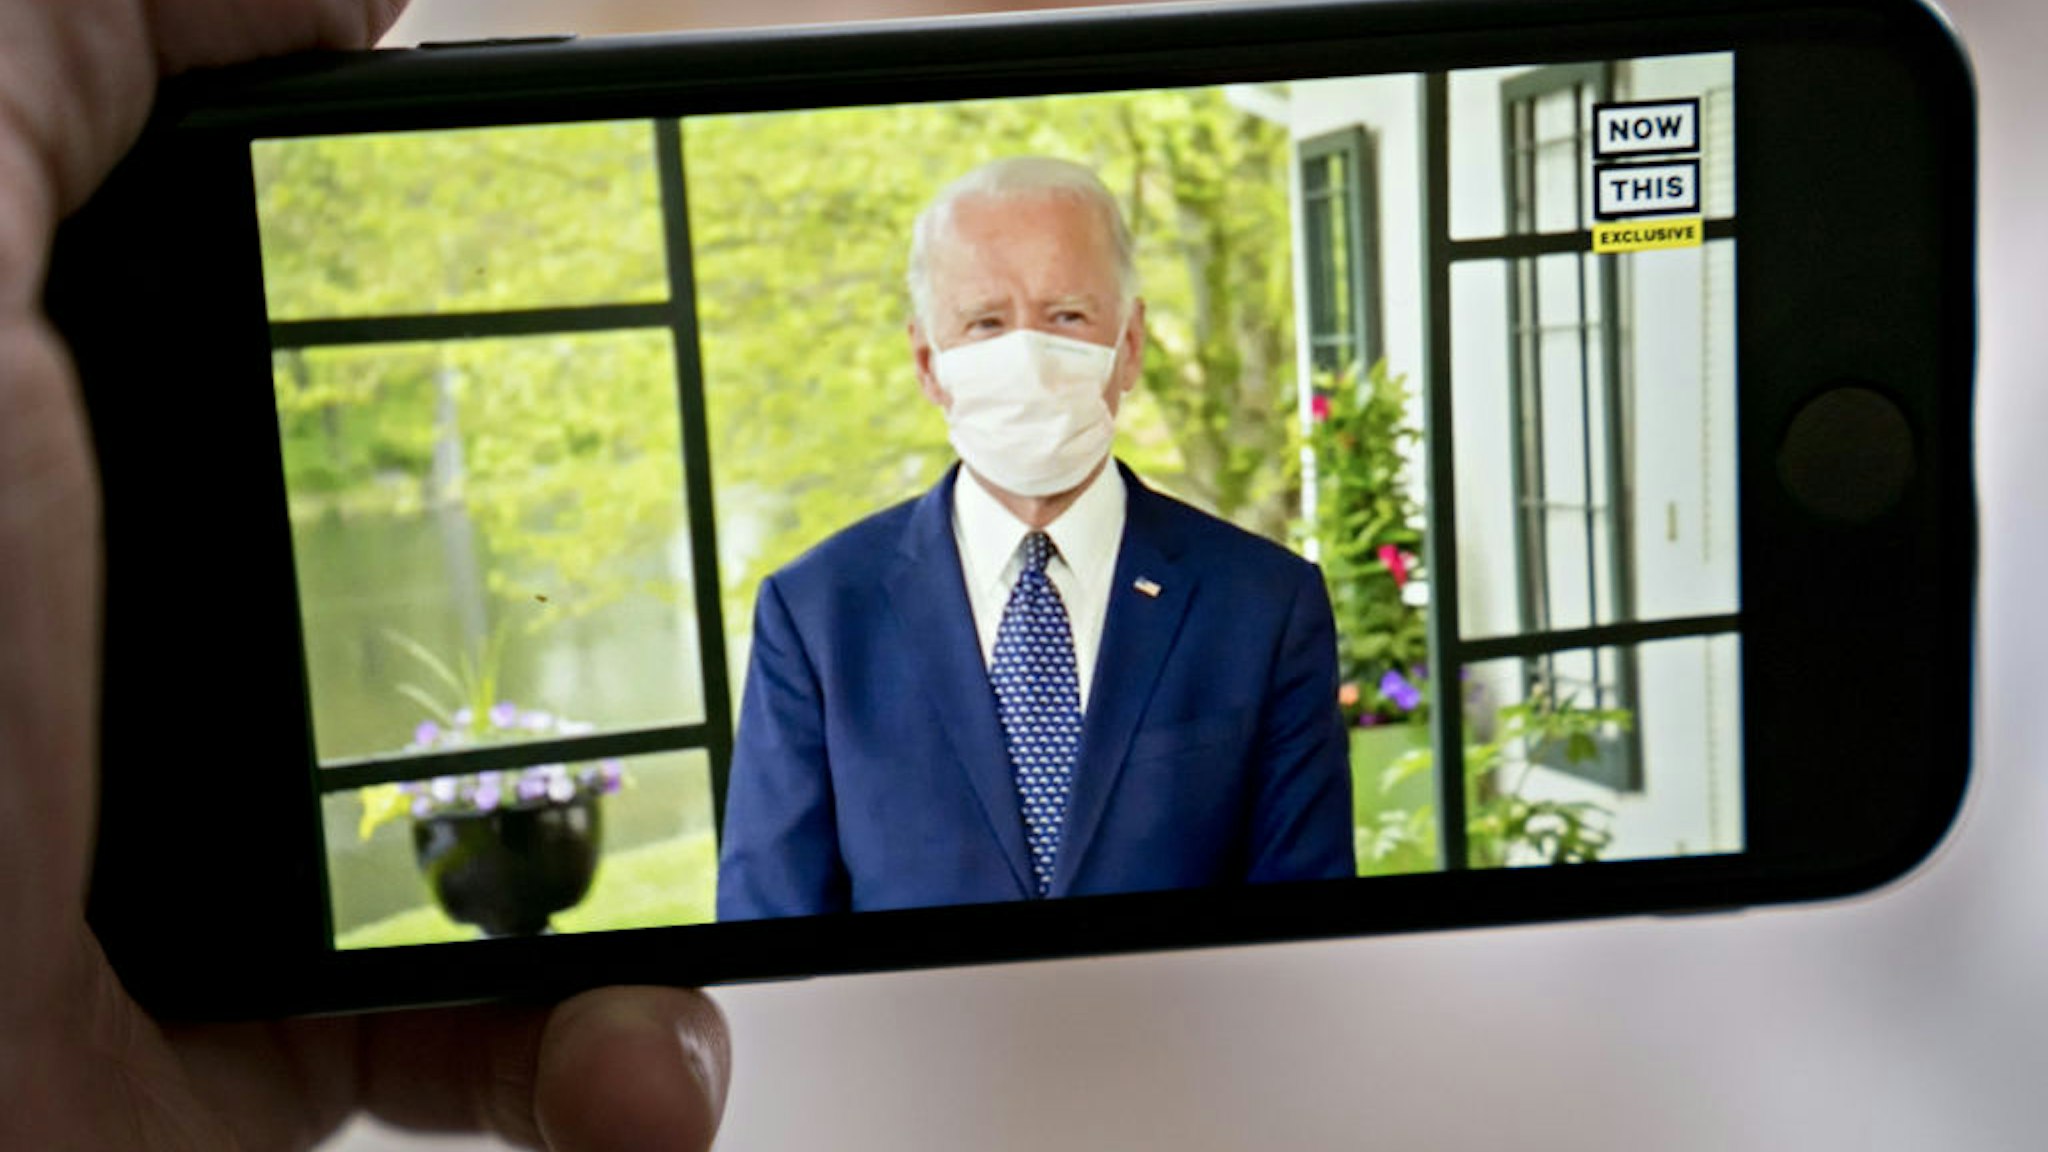 Former Vice President Joe Biden, presumptive Democratic presidential nominee, wears a protective mask during a NowThis economic address seen on a smartphone in Arlington, Virginia, U.S., on Friday, May 8, 2020. A super political action committee backing Joe Biden will launch a $10 million television ad campaign touting the presumptive Democratic nominee's leadership on the economic recovery after the 2008 financial crisis. Photographer: Andrew Harrer/Bloomberg via Getty Images